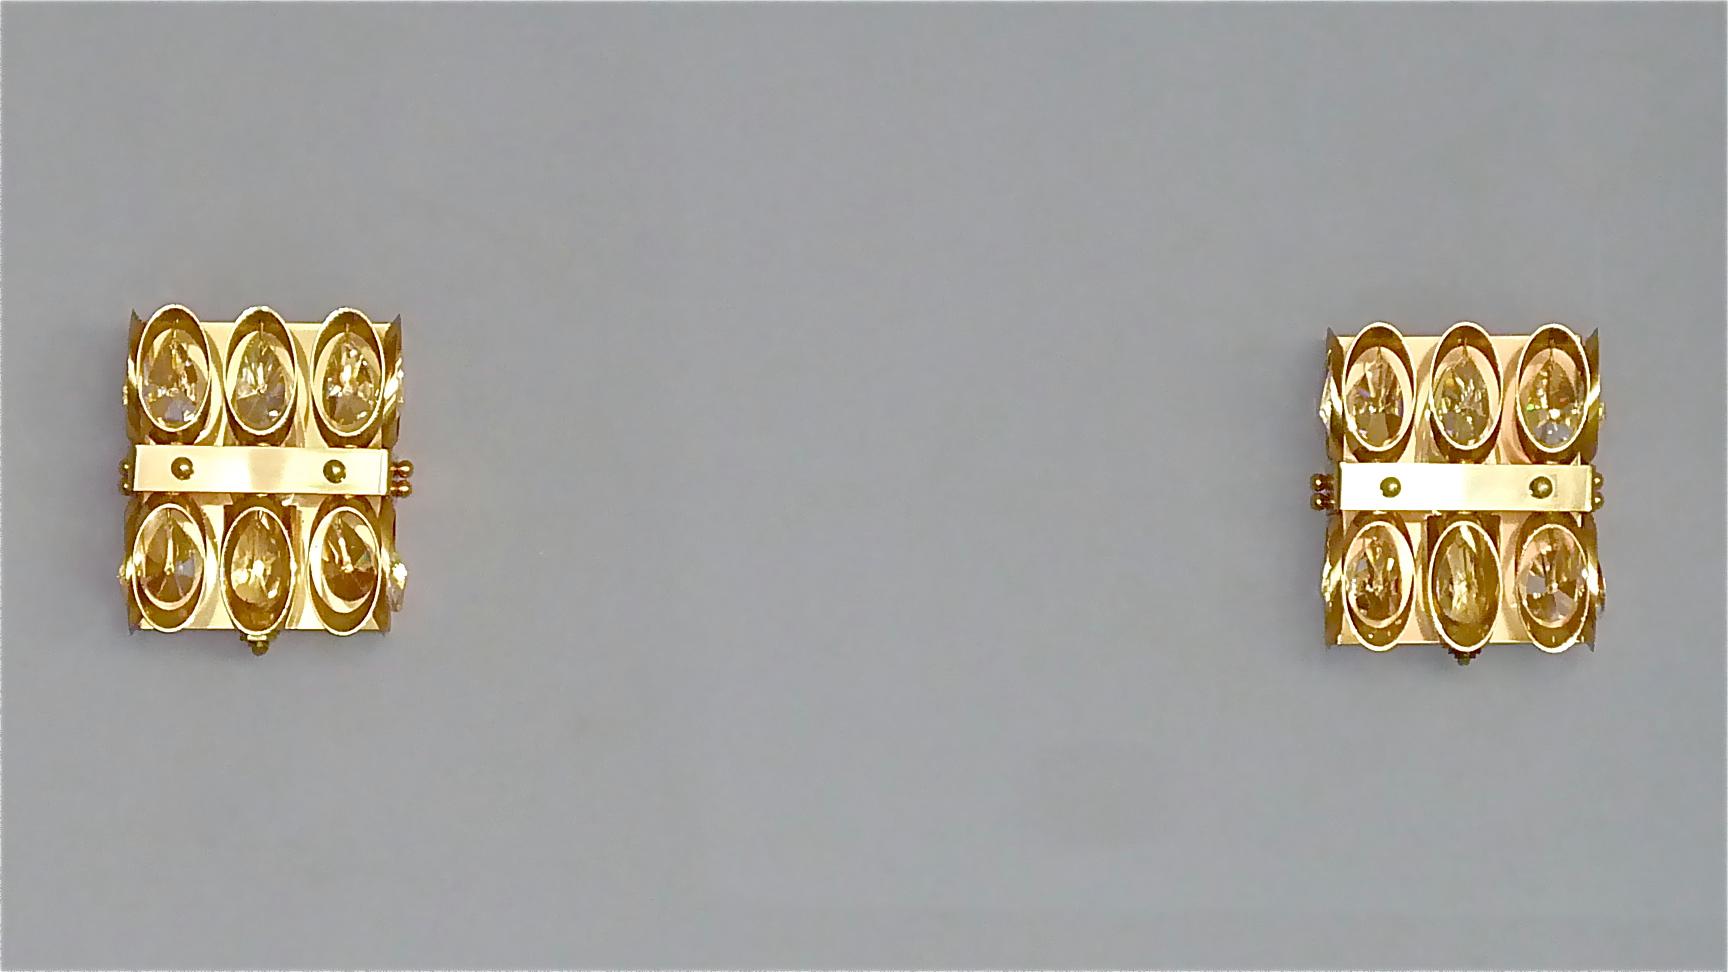 Midcentury Lobmeyr or Palwa Gilt Brass Faceted Crystal Glass Sconces 1960s, Pair For Sale 1